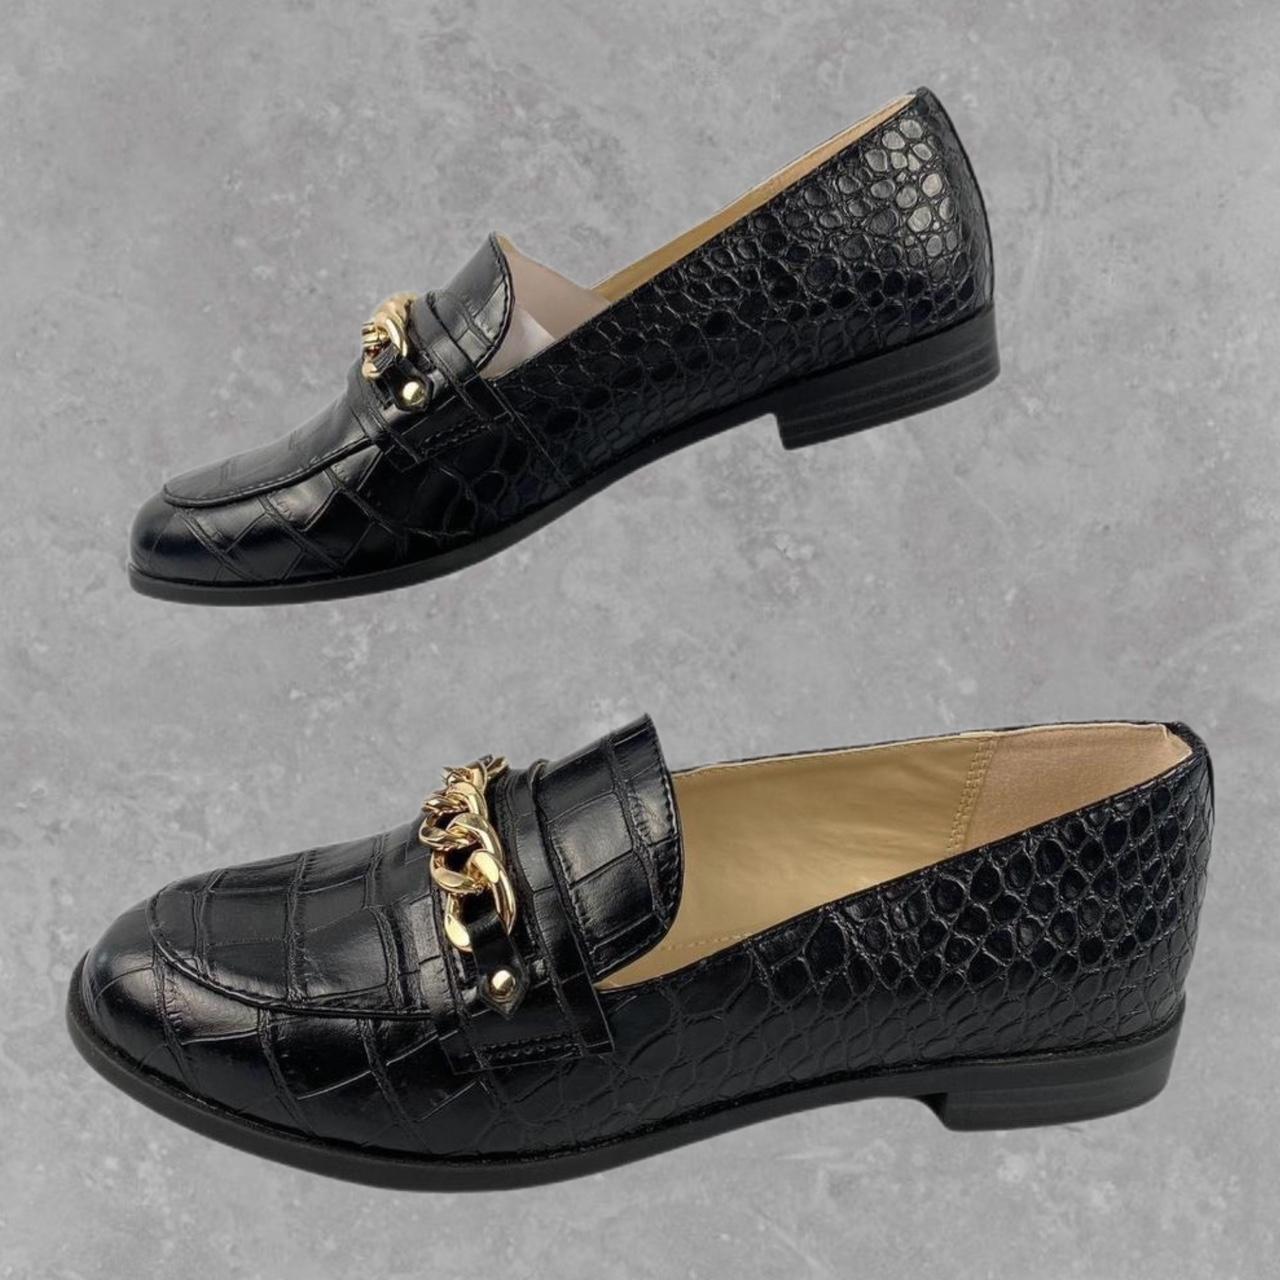 Charter Club Women's Black and Gold Loafers